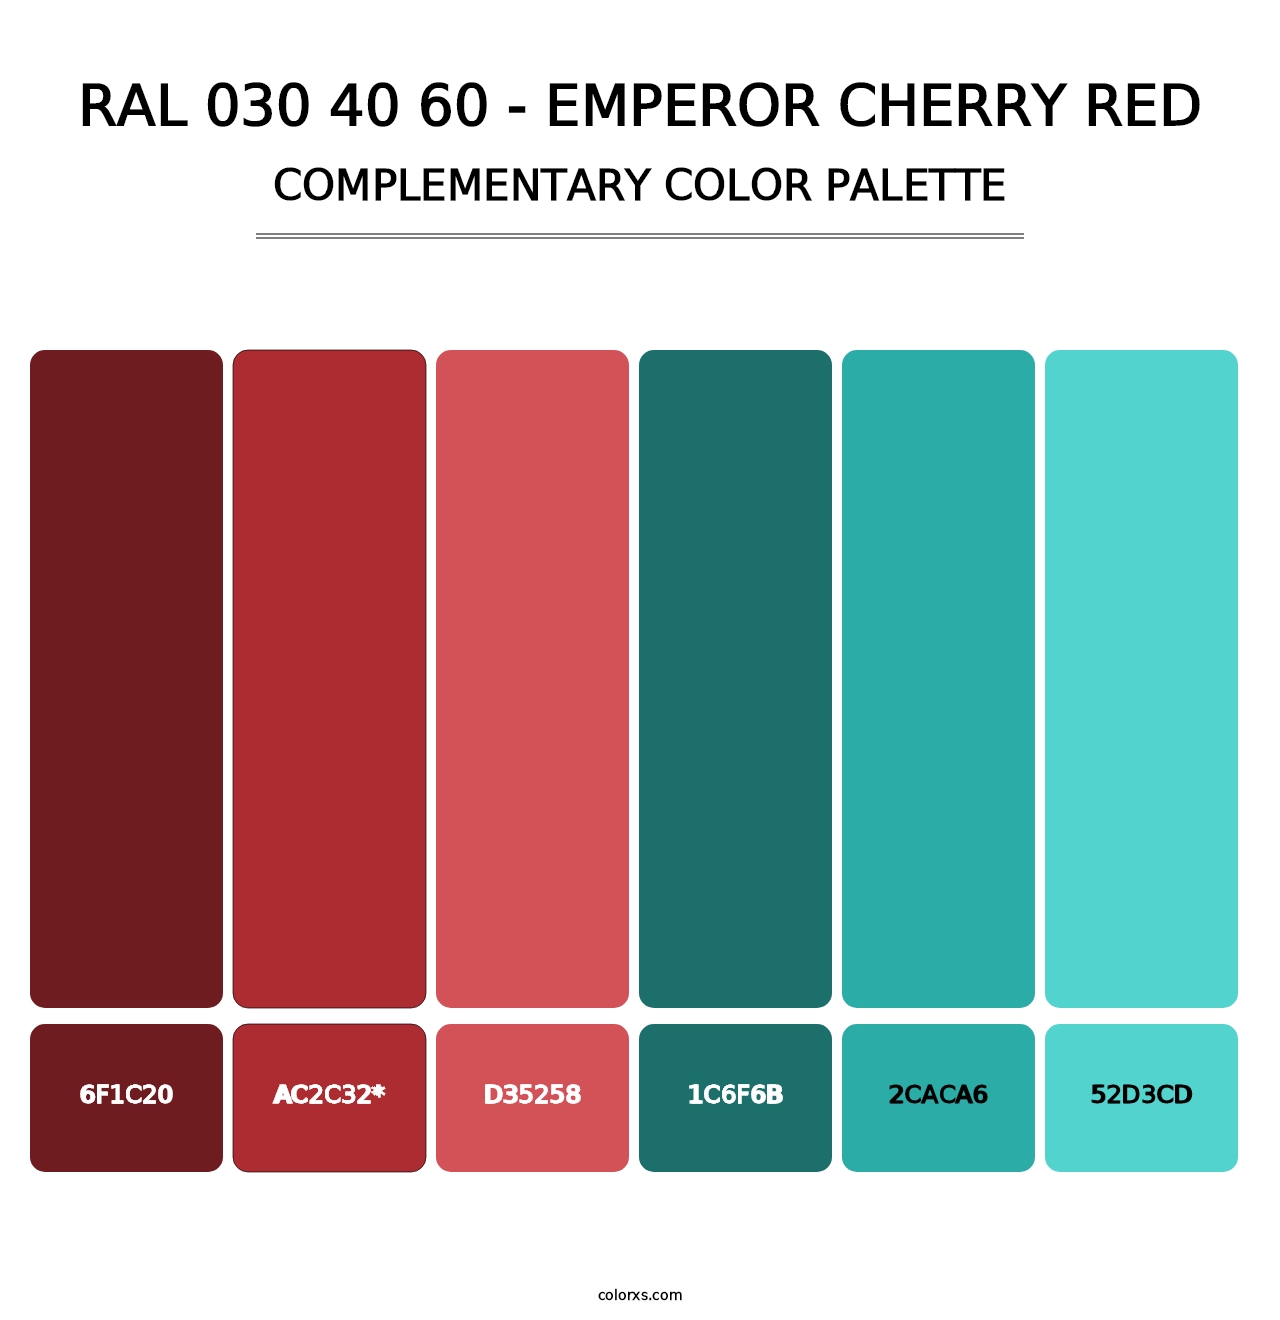 RAL 030 40 60 - Emperor Cherry Red - Complementary Color Palette